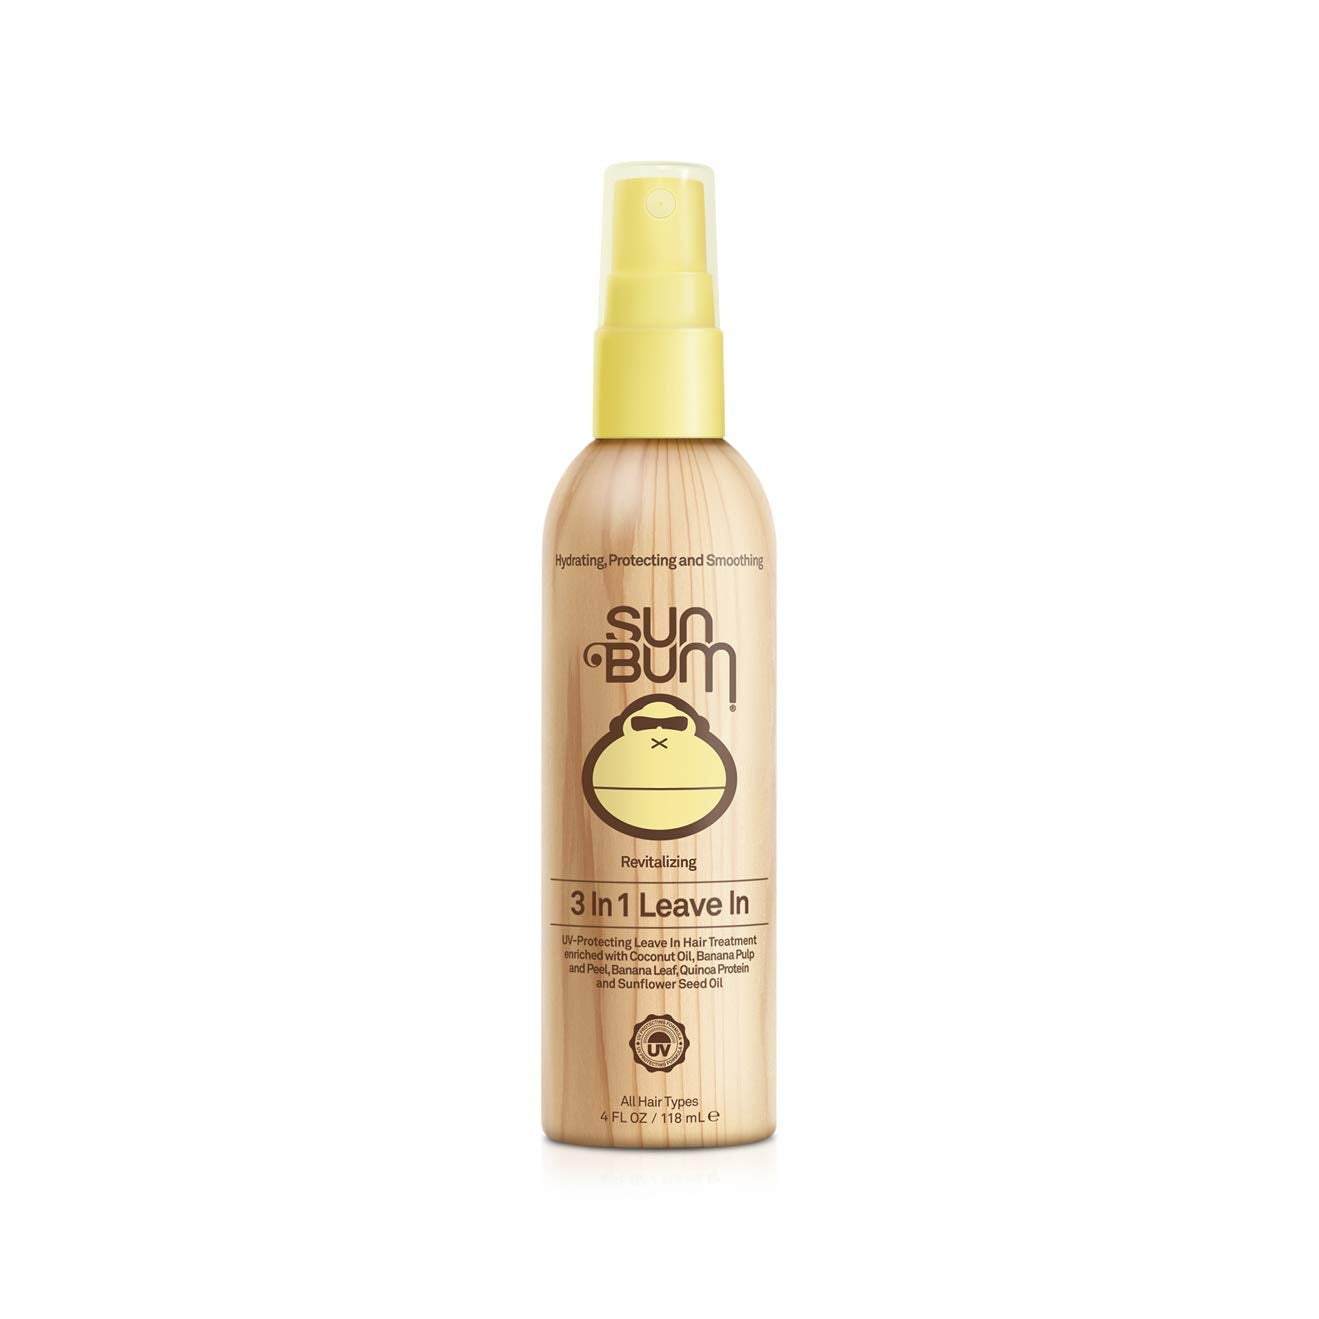 Sun Bum Revitalizing 3-In-1 Leave-In Conditioner Spray for All Hair Types, 4 fl.oz / 118ml